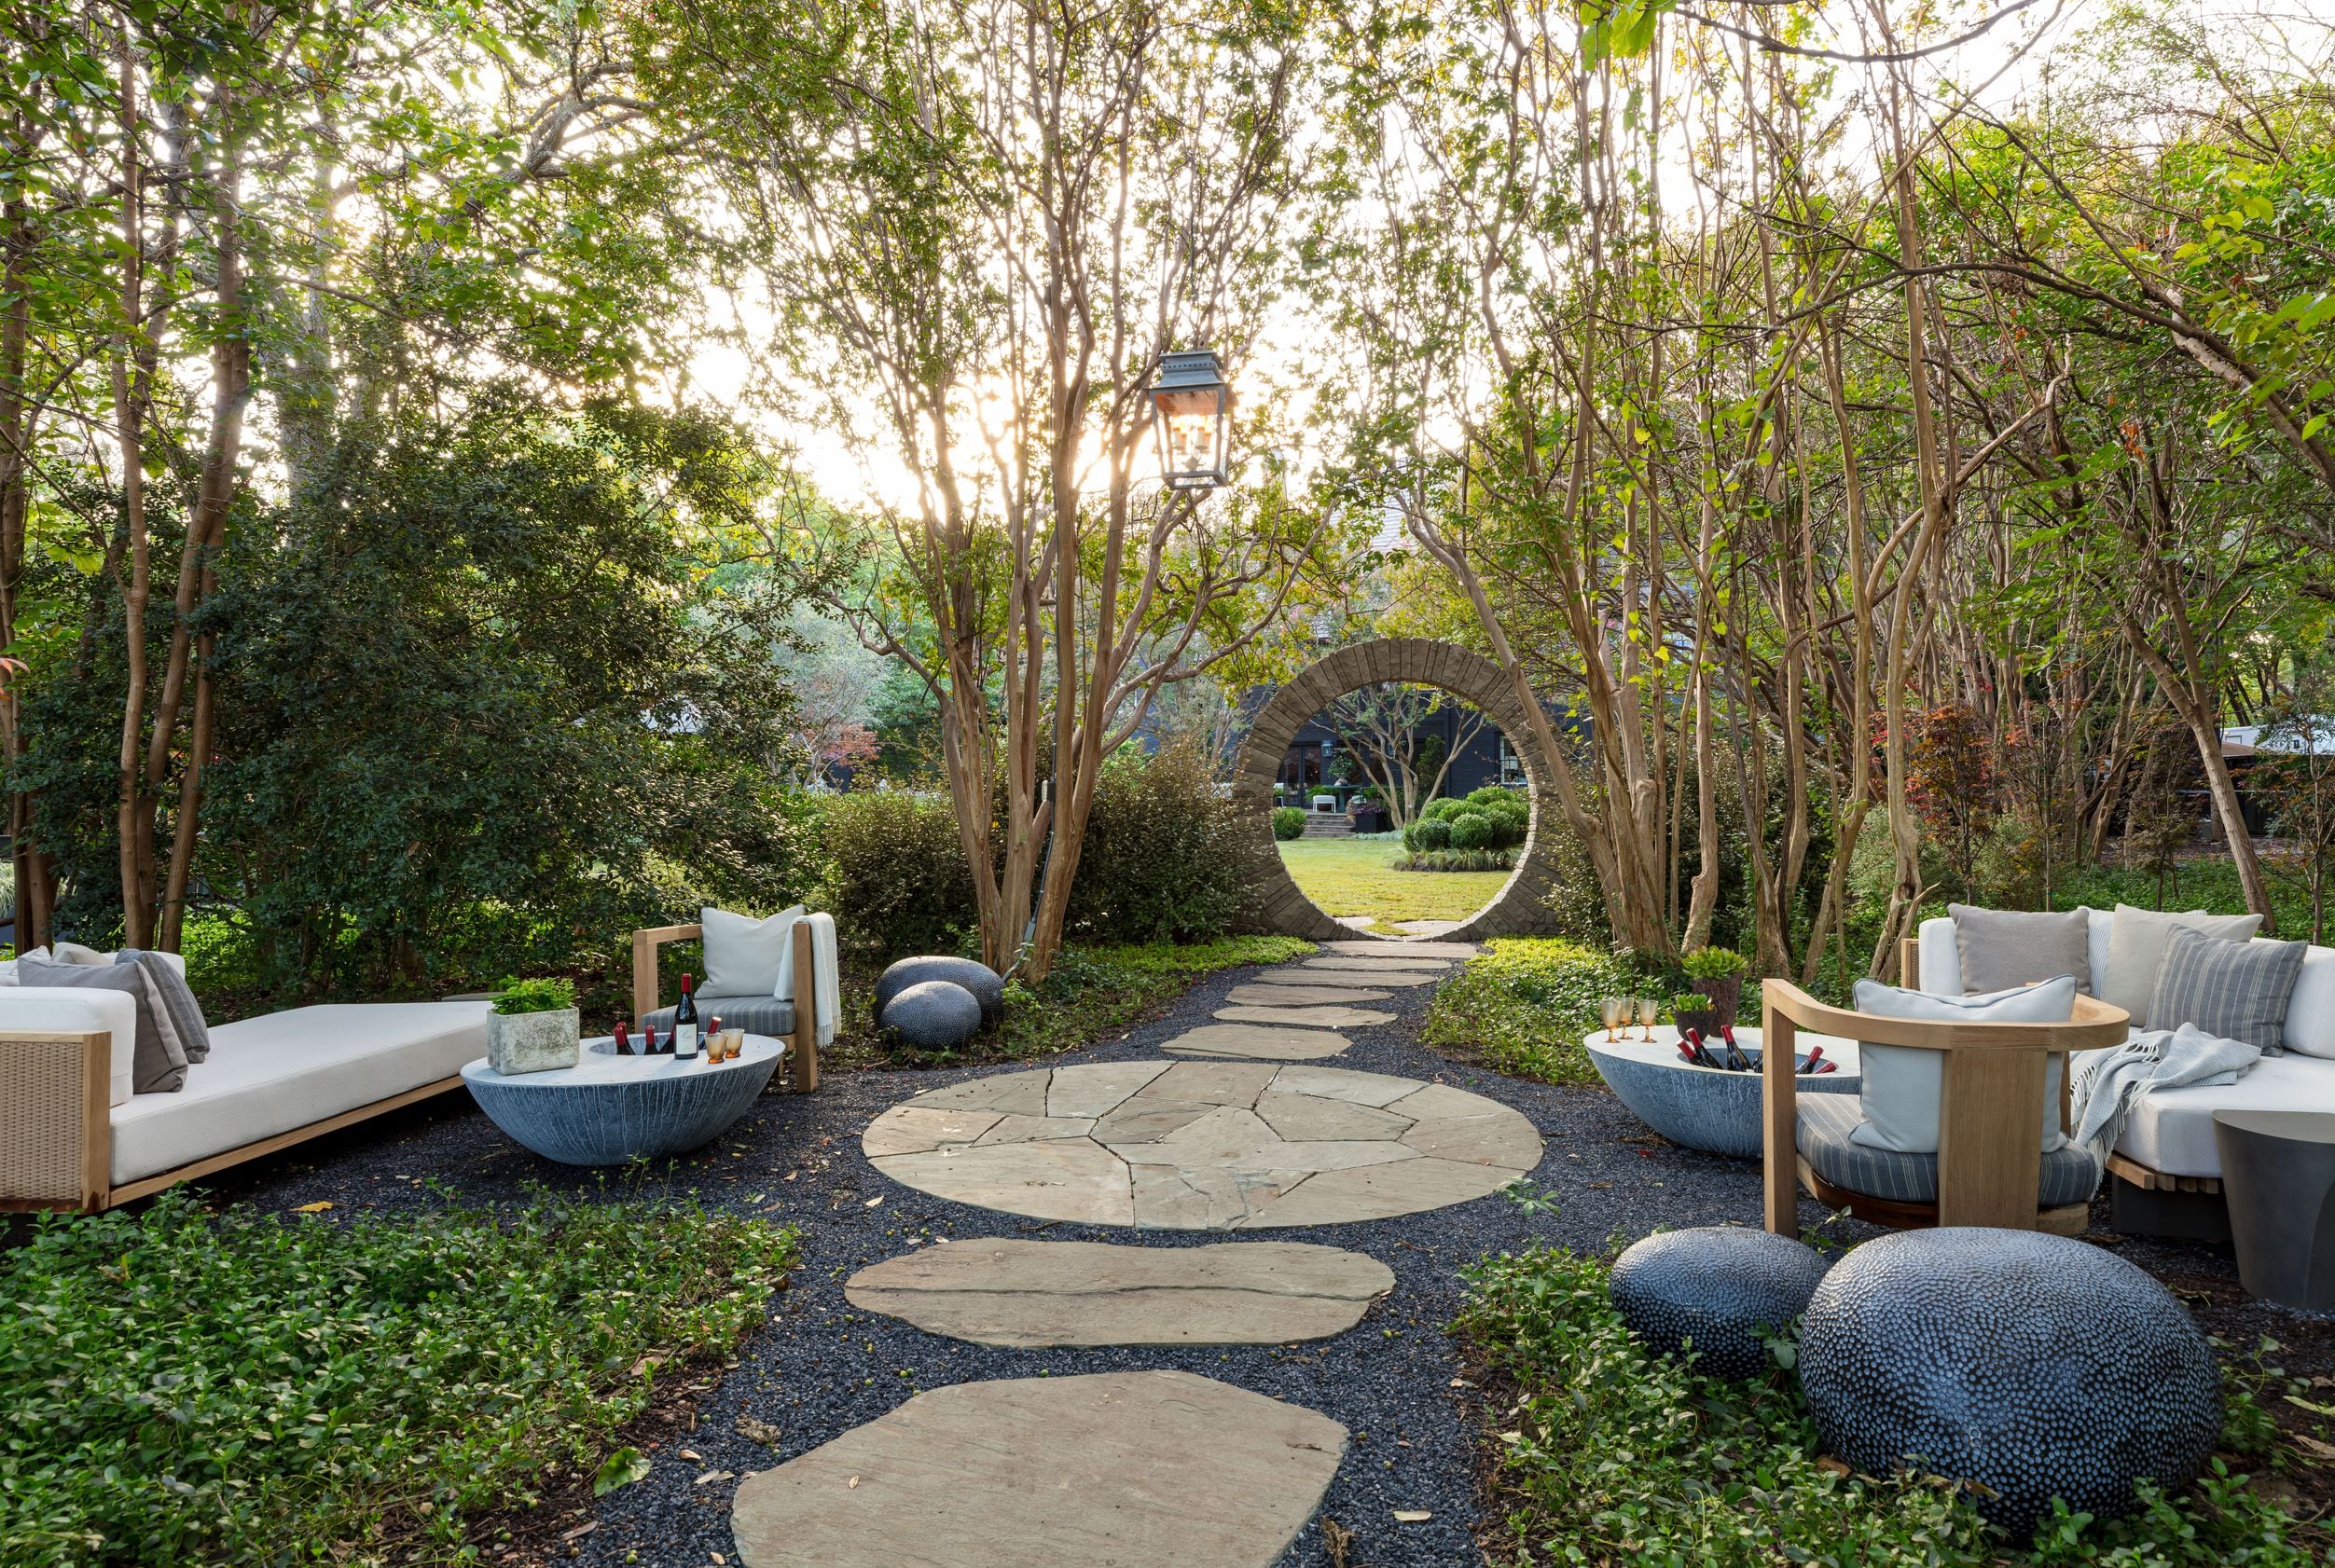 A moon gate leads to “the Woodland Garden,” which is an outdoor living room furnished with...